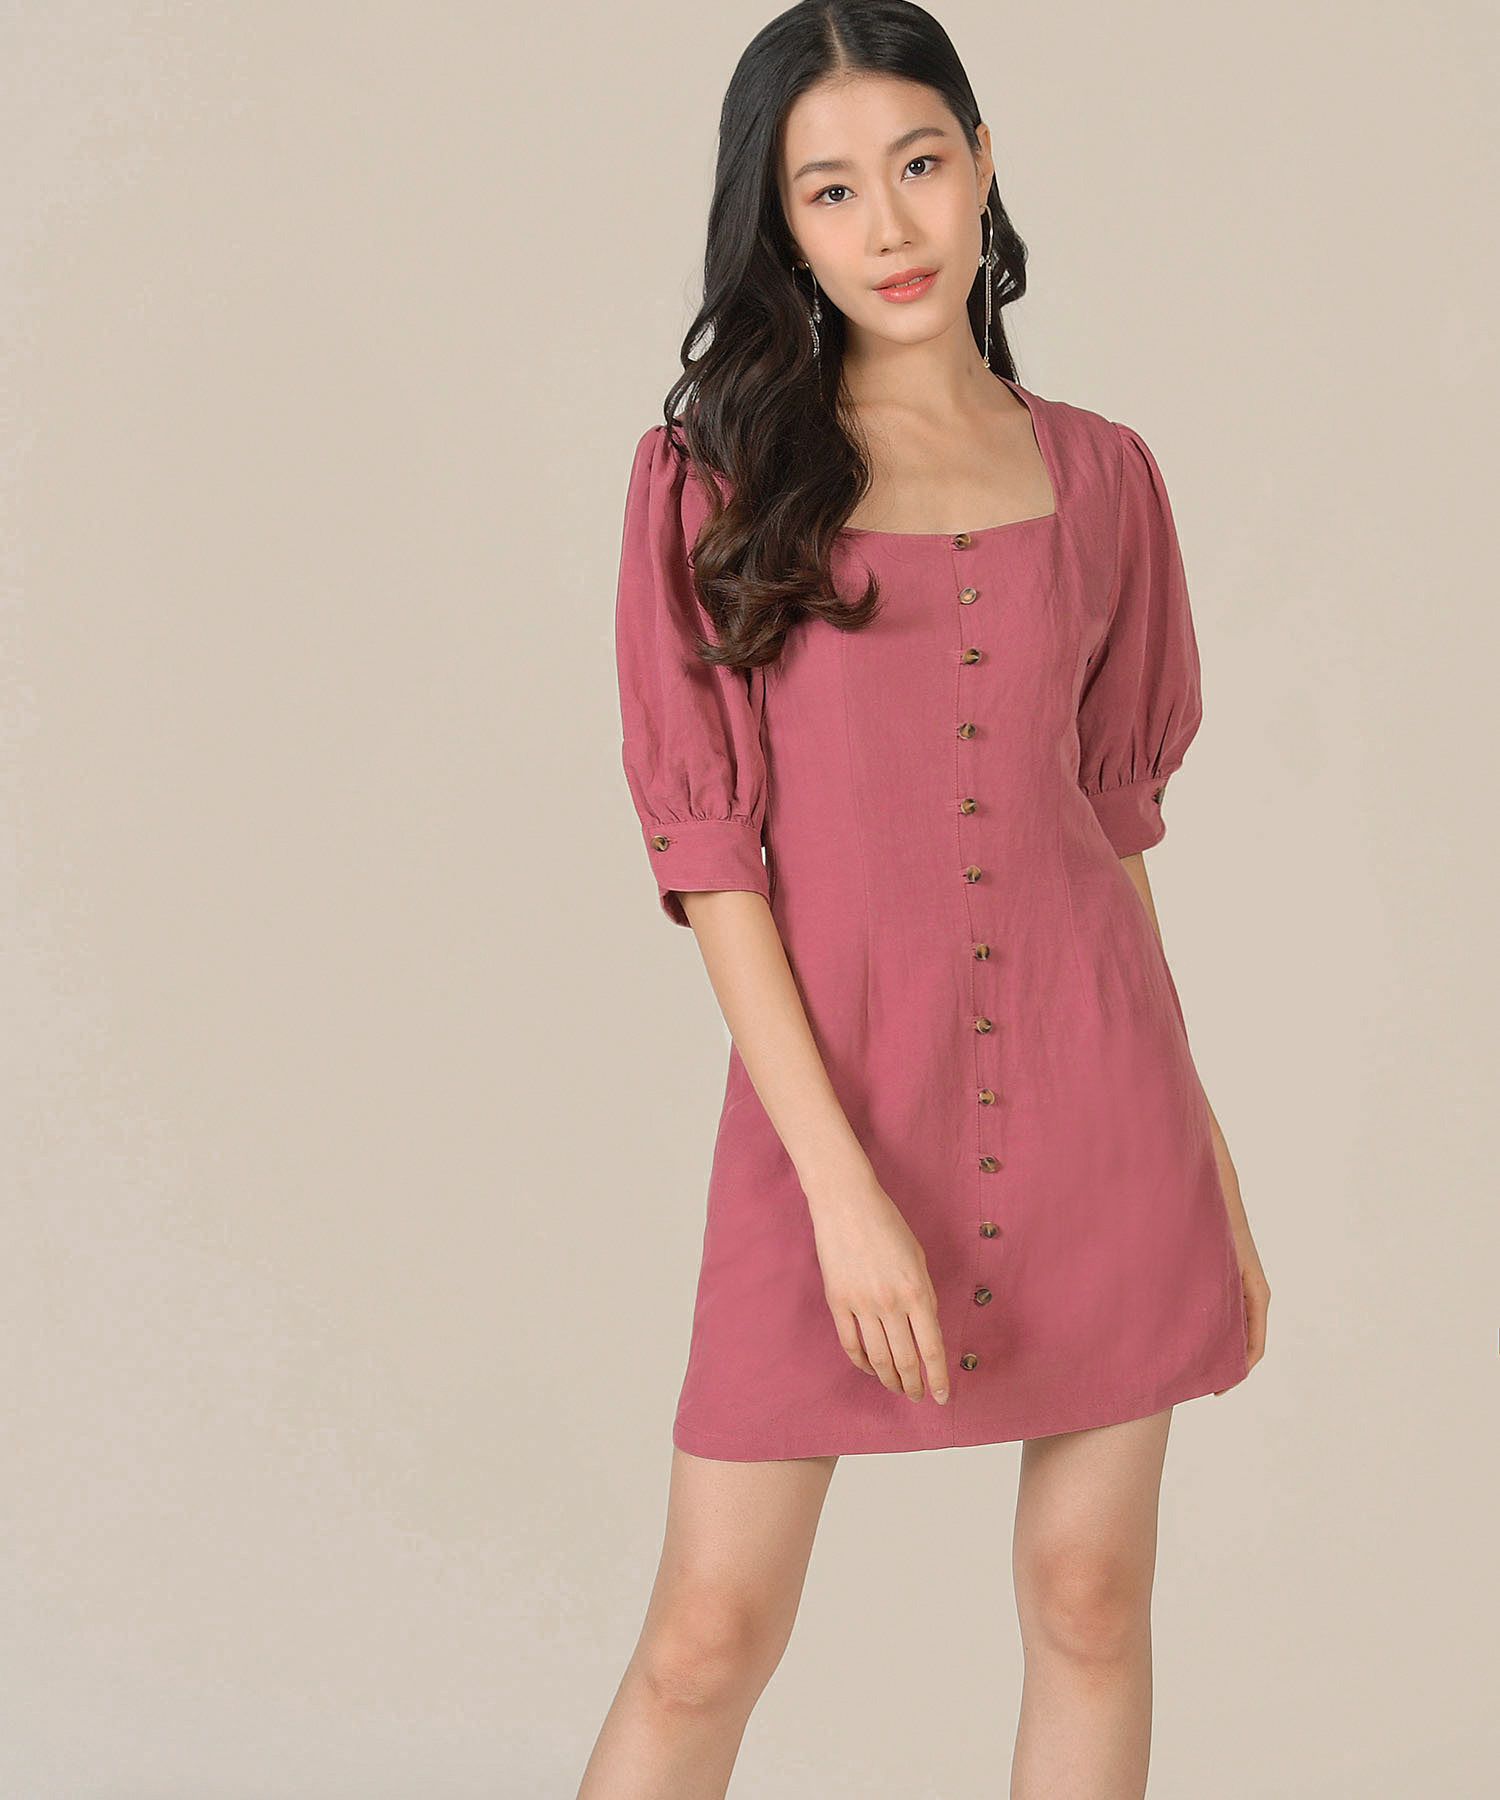 Caprice Button Down Dress - Rose Pink